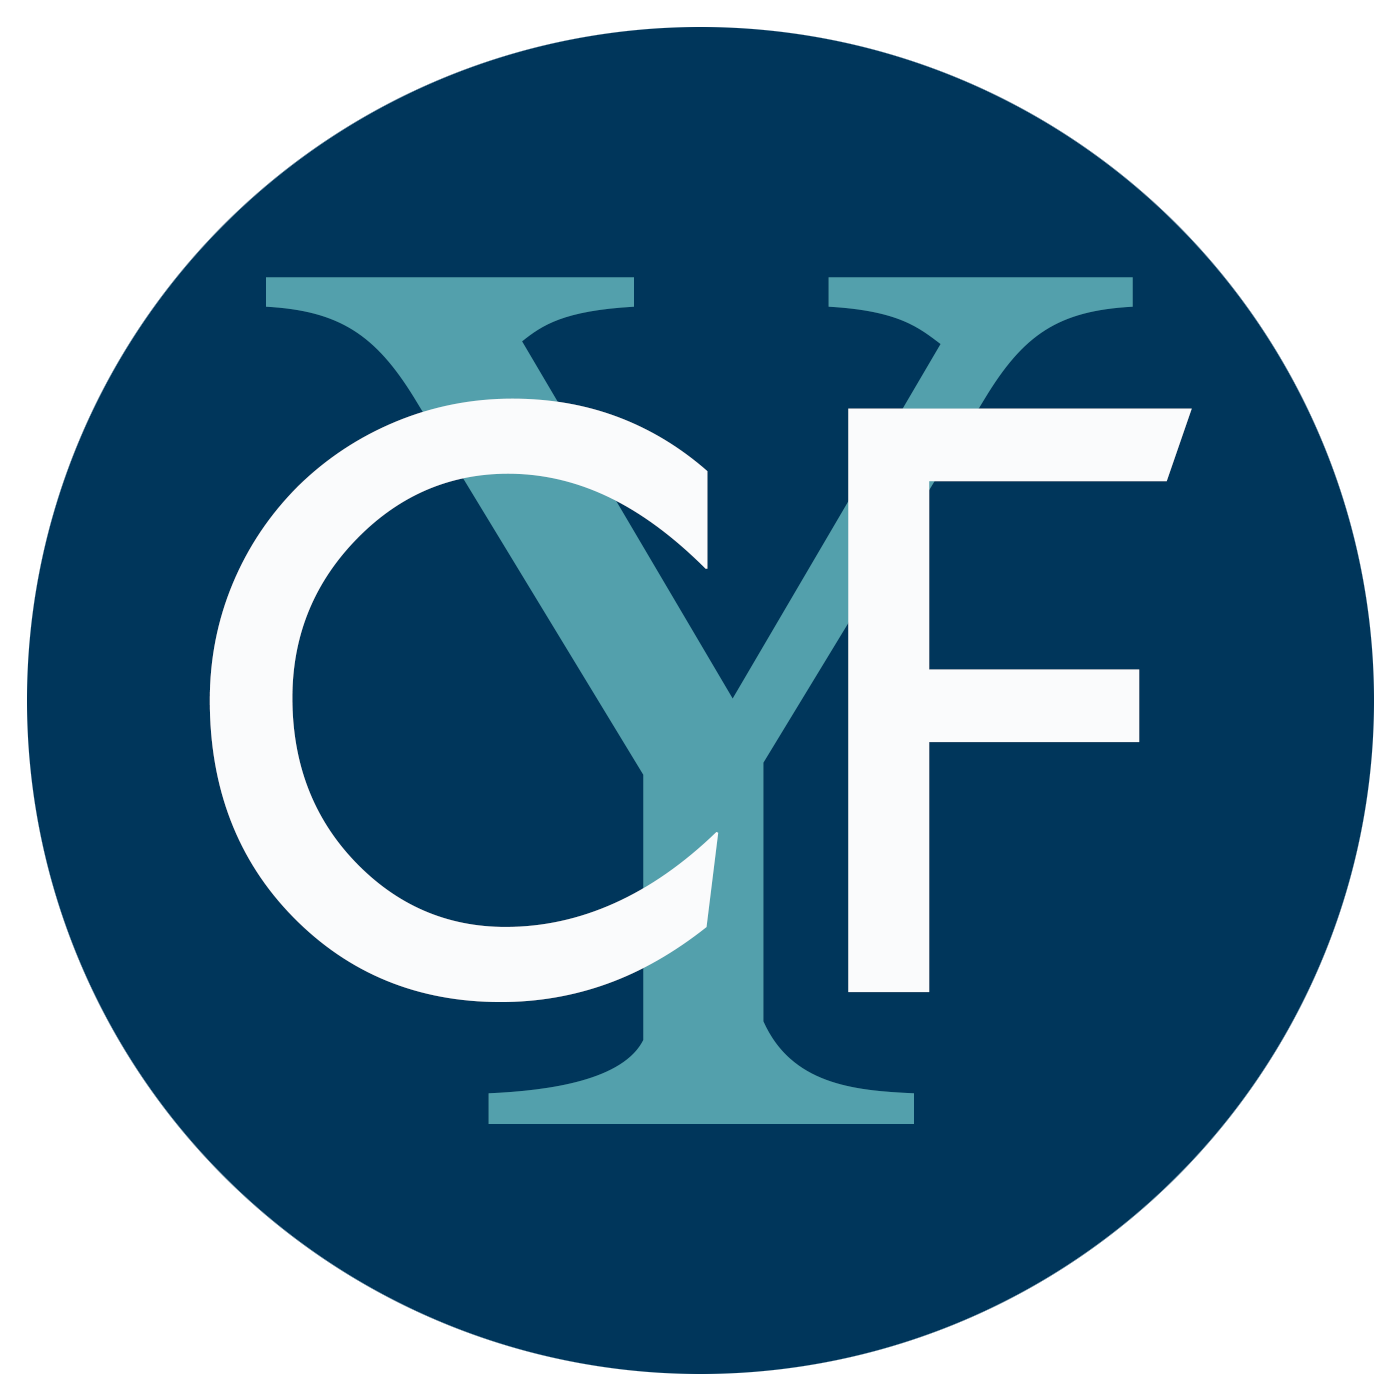 Round logo with the letters Y, C, and F